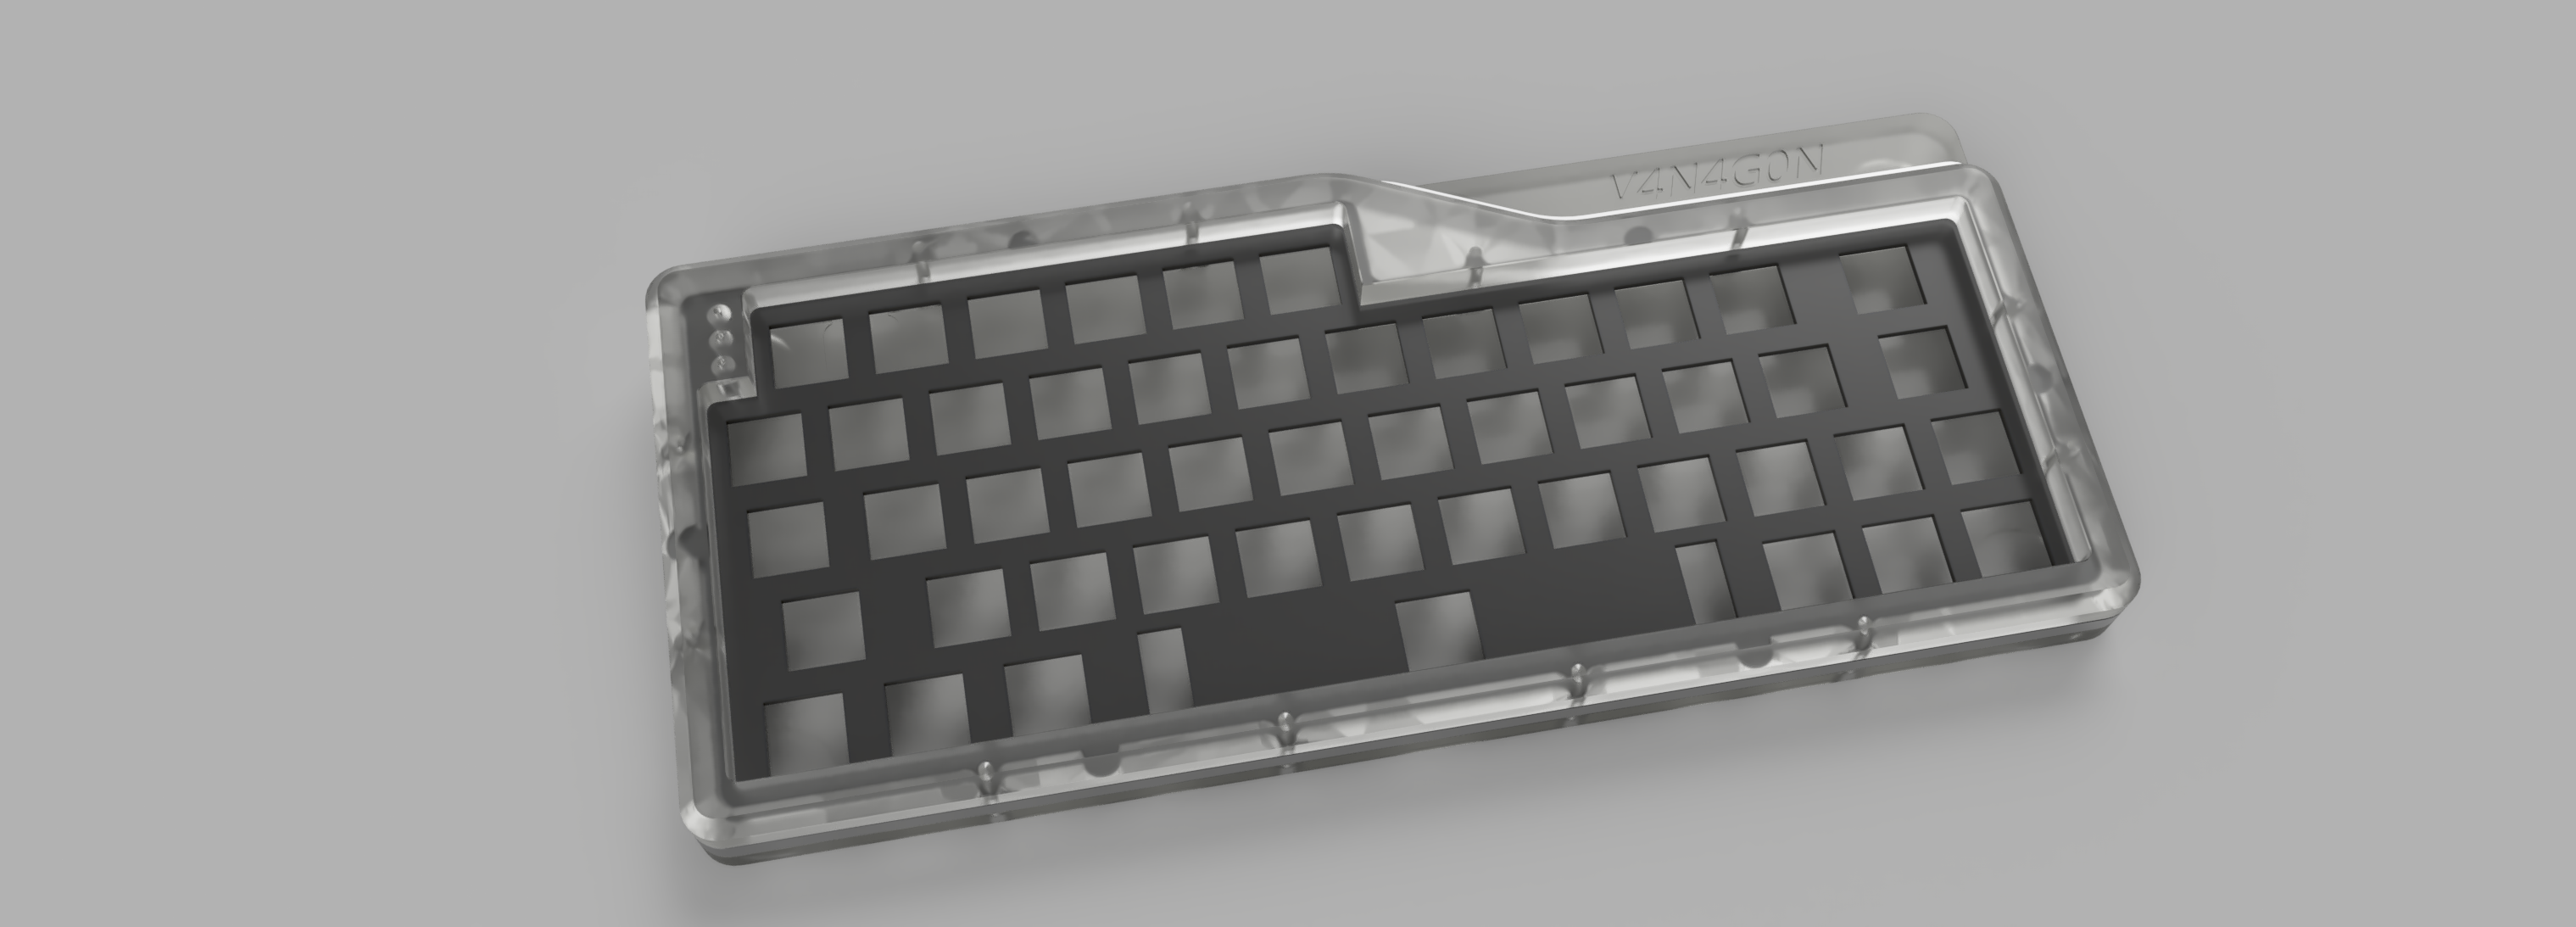 Another render of the proposed V4N4G0N R4 case